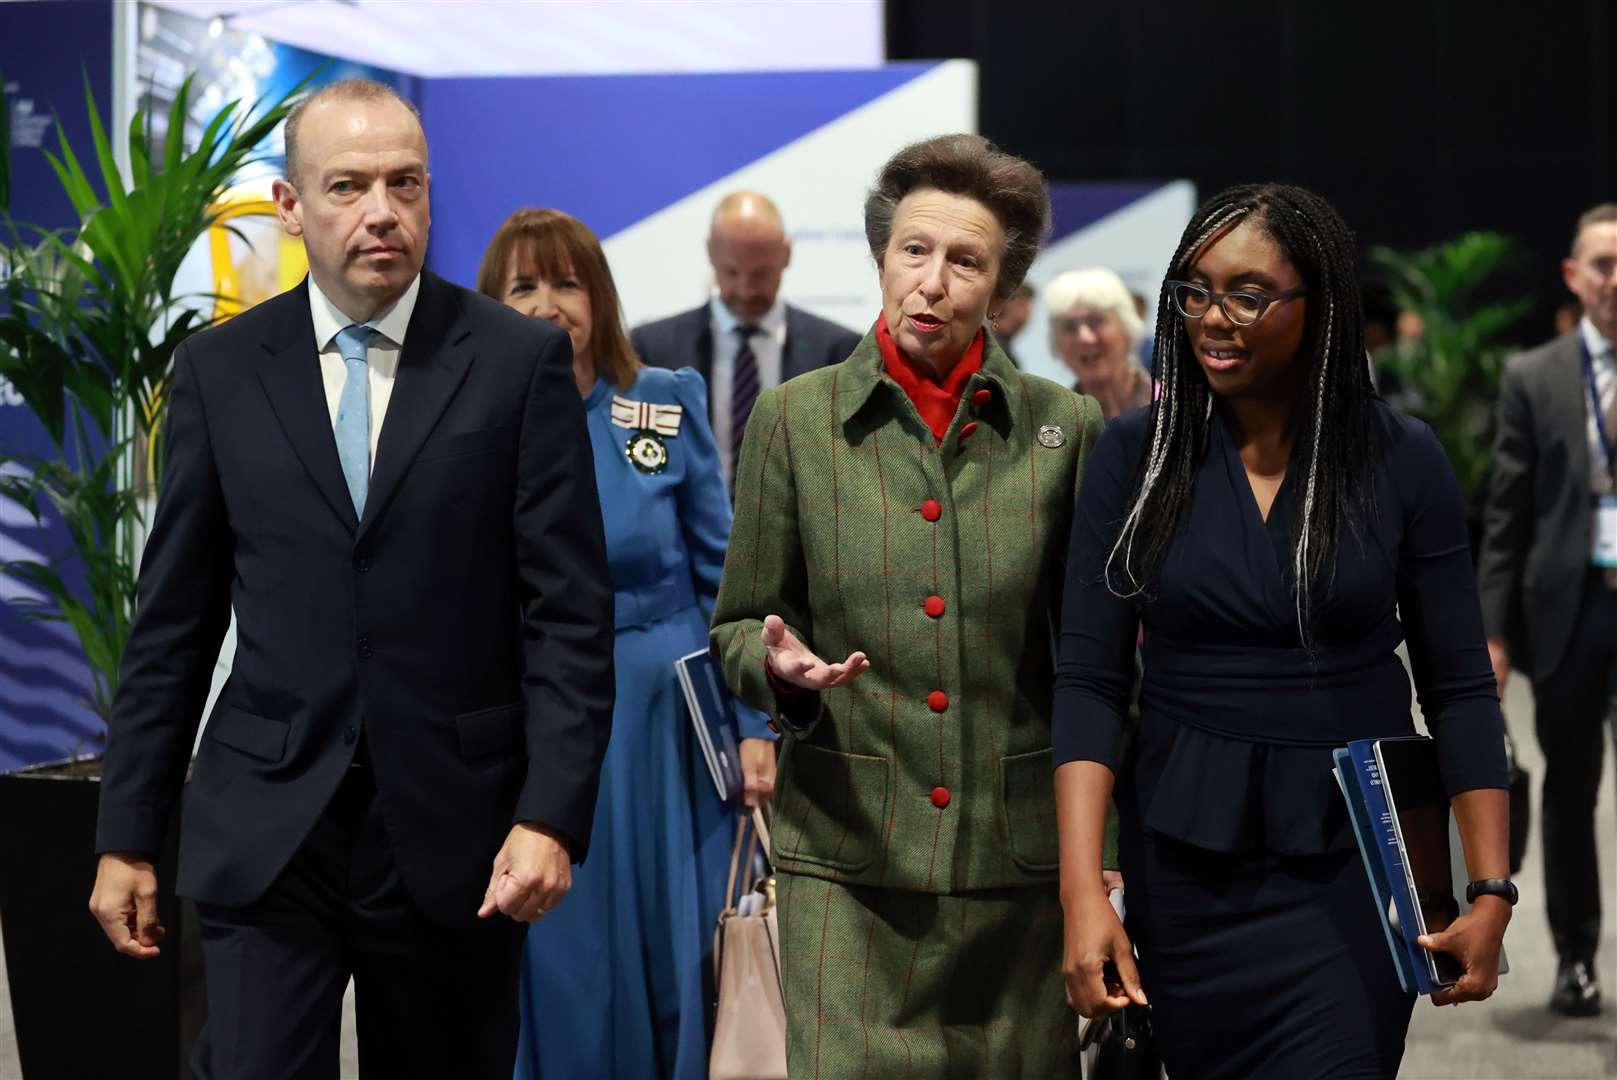 Northern Ireland Secretary Chris Heaton-Harris, left to right, the Princess Royal and Trade Secretary Kemi Badenoch all attended the event at the ICC in Belfast (Liam McBurney/PA)